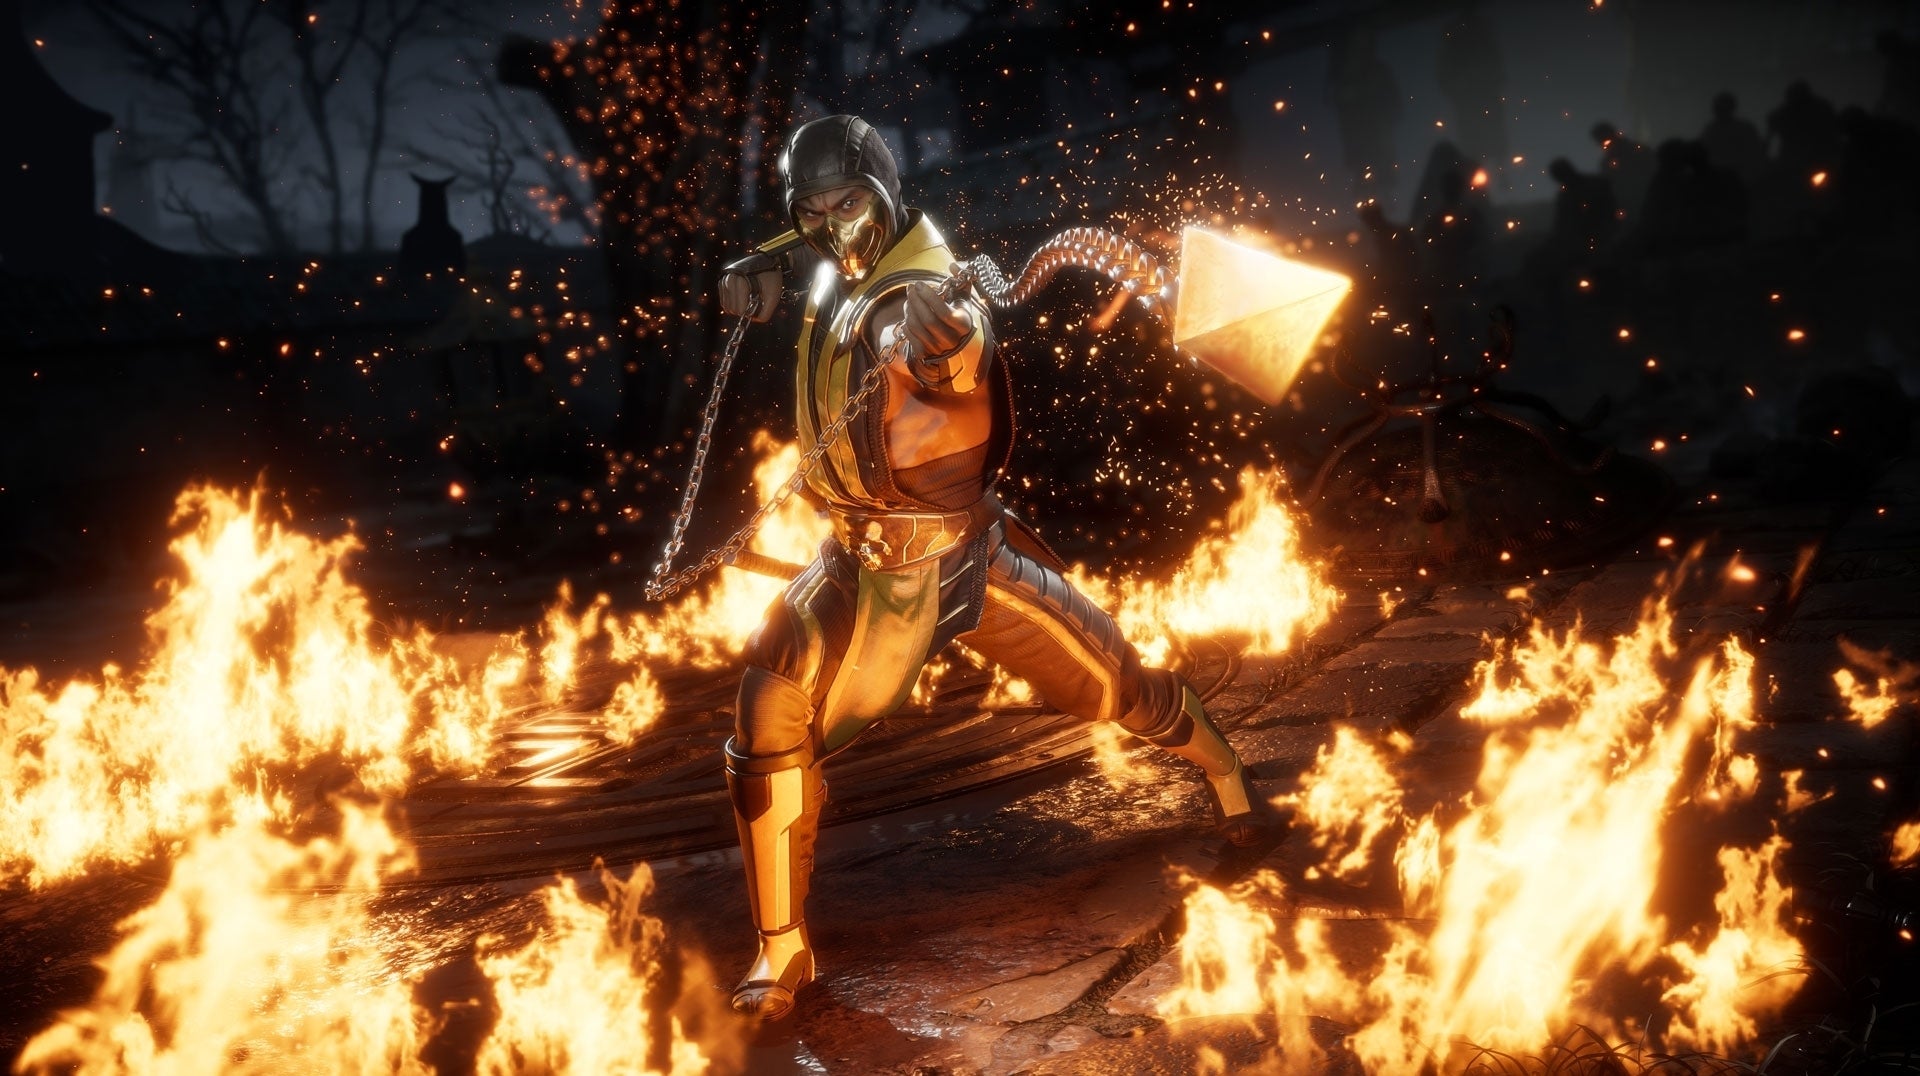 Image for As Mortal Kombat 11 punches through 8m copies sold, NetherRealm teases what's next